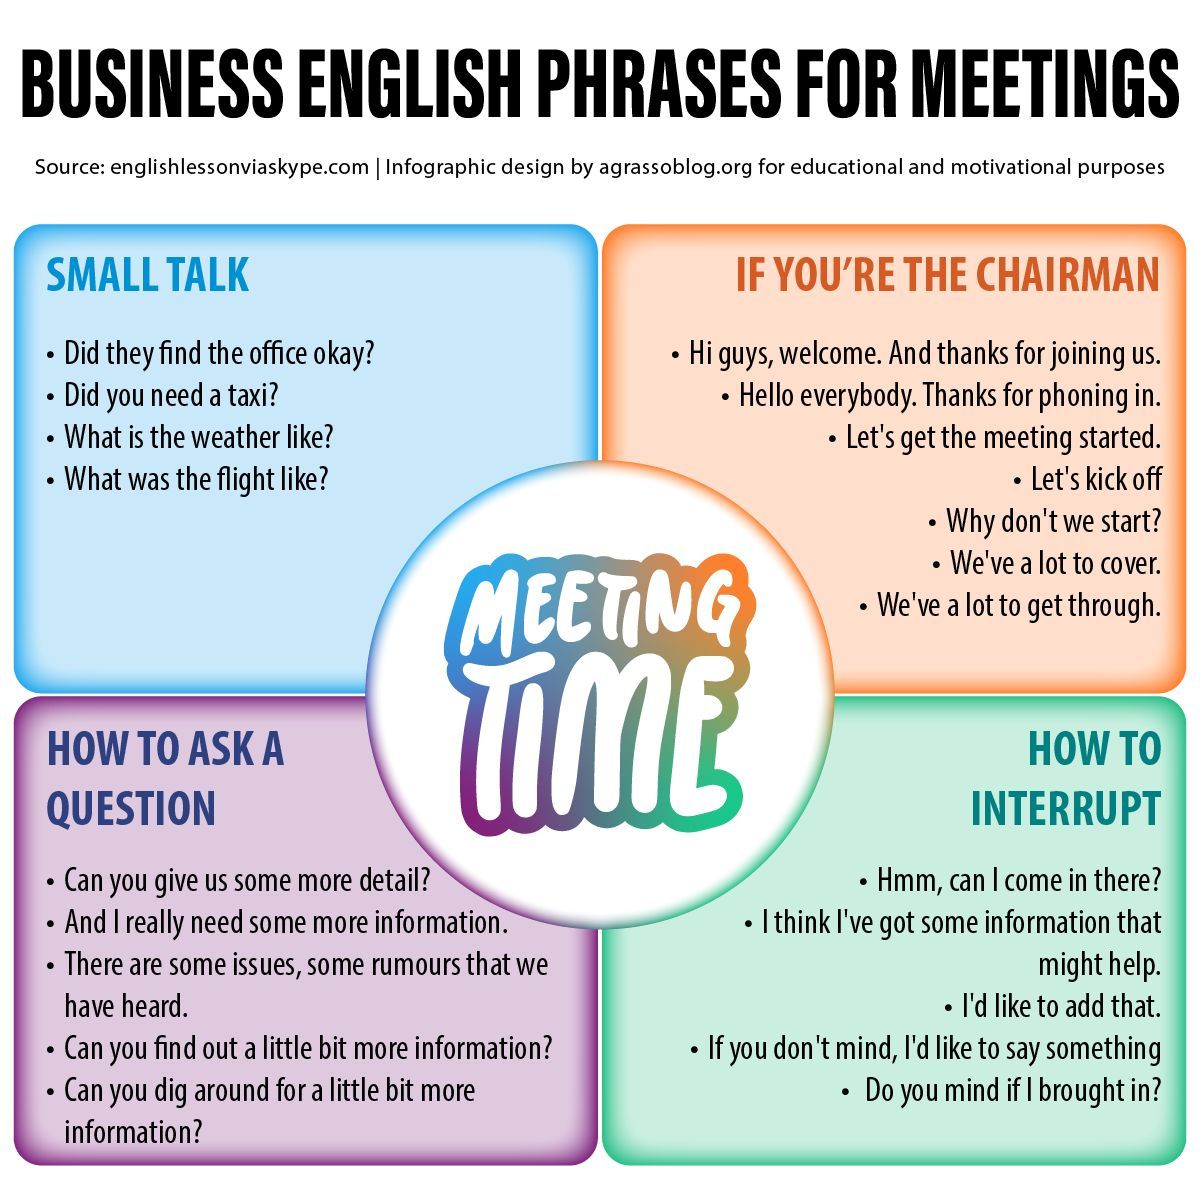 Several key phrases can help business meetings run smoothly. You might inquire about someone's trip or the weather to initiate a casual conversation.

#businessmeetings #english